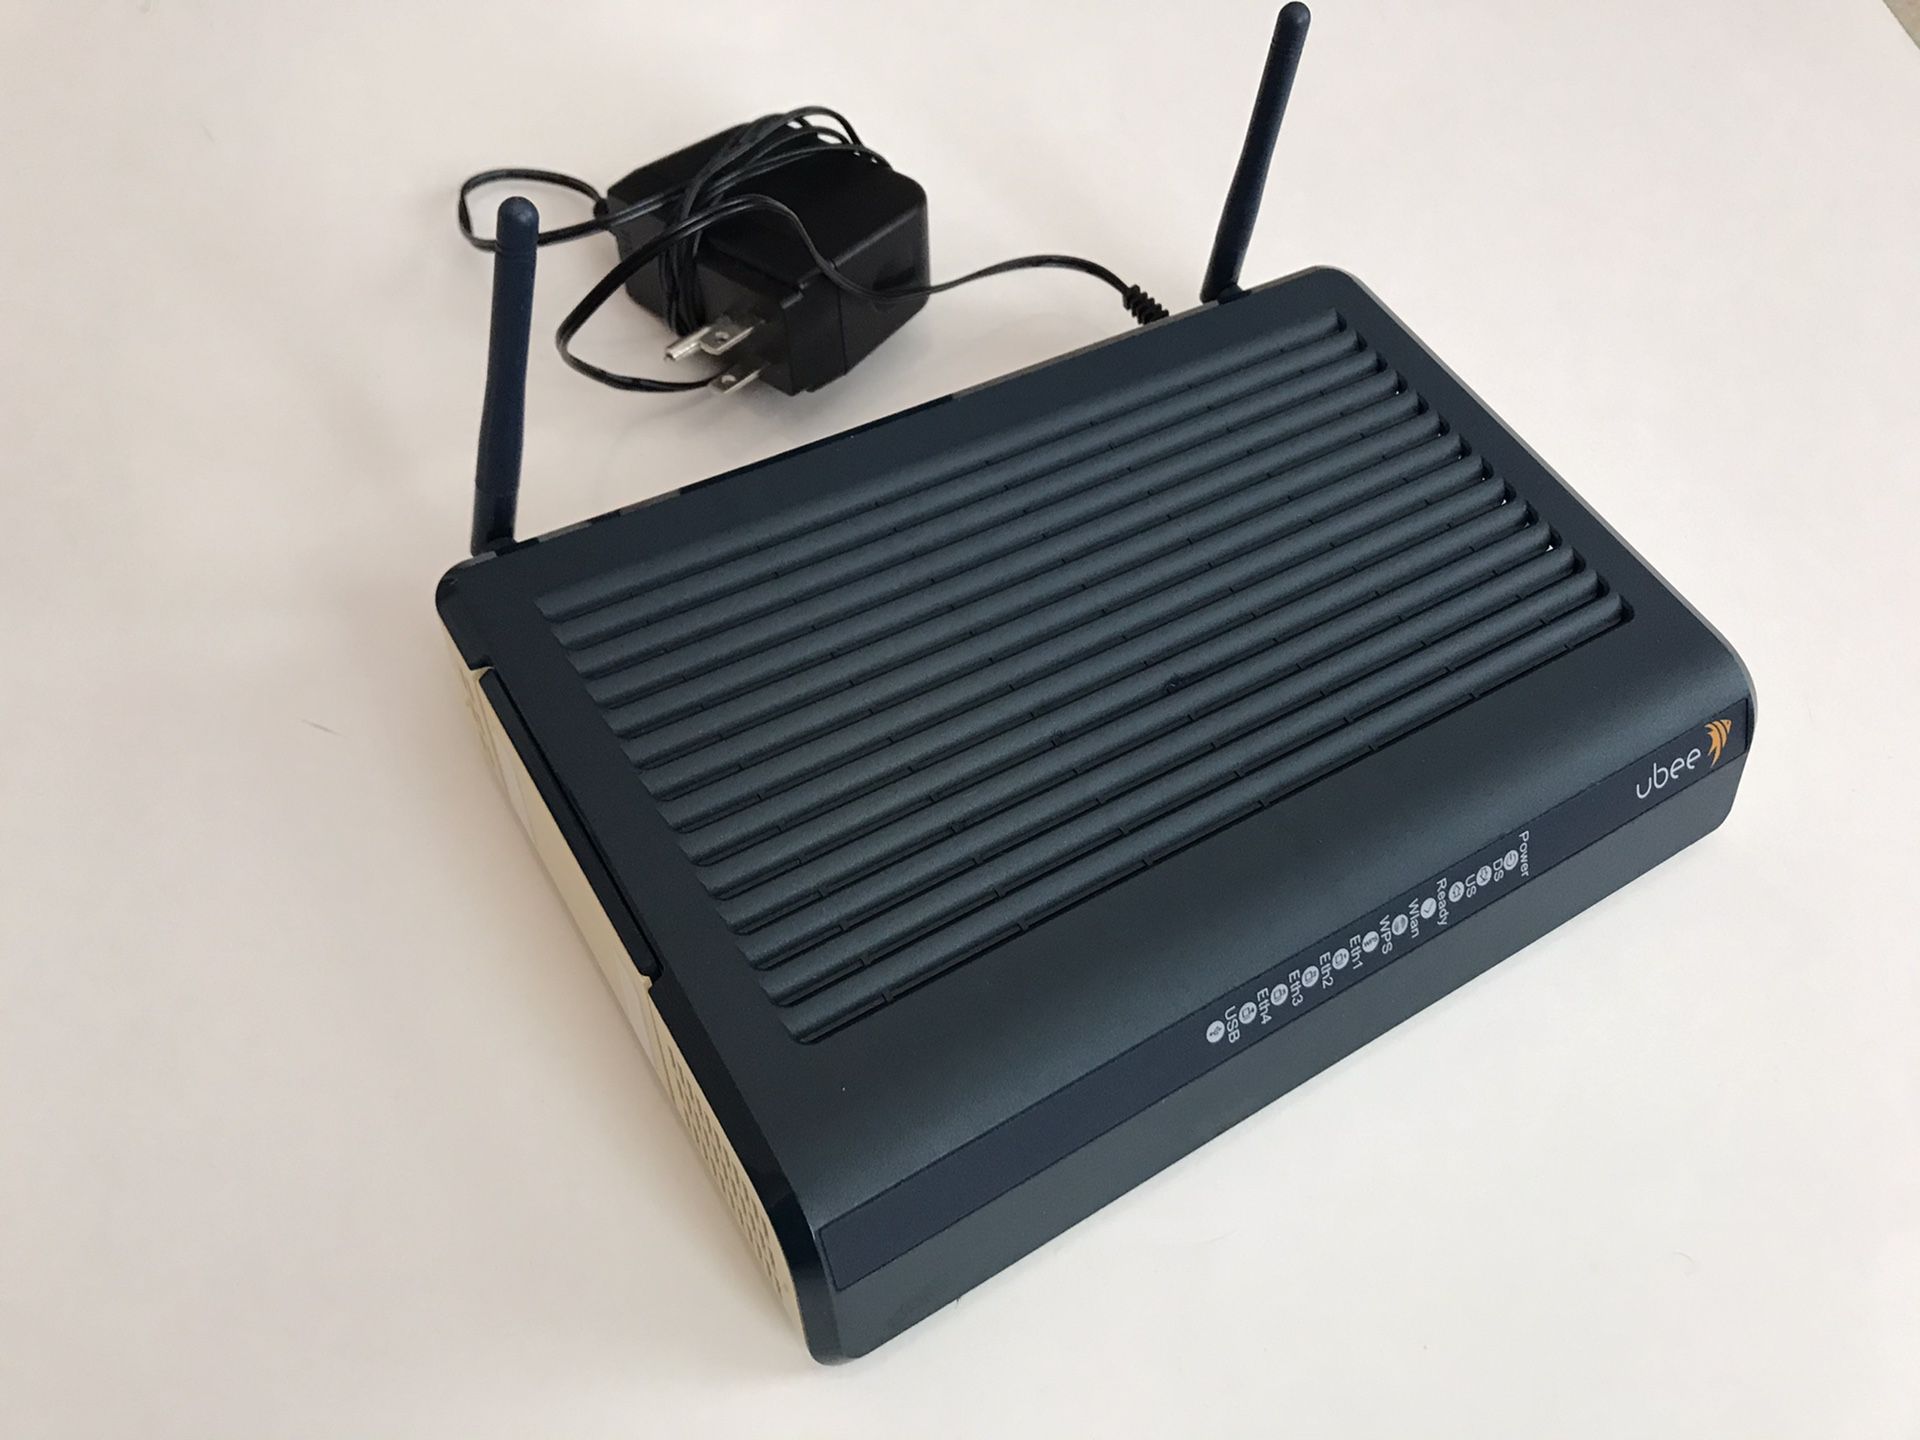 ubee cable modem and wifi router for spectrum